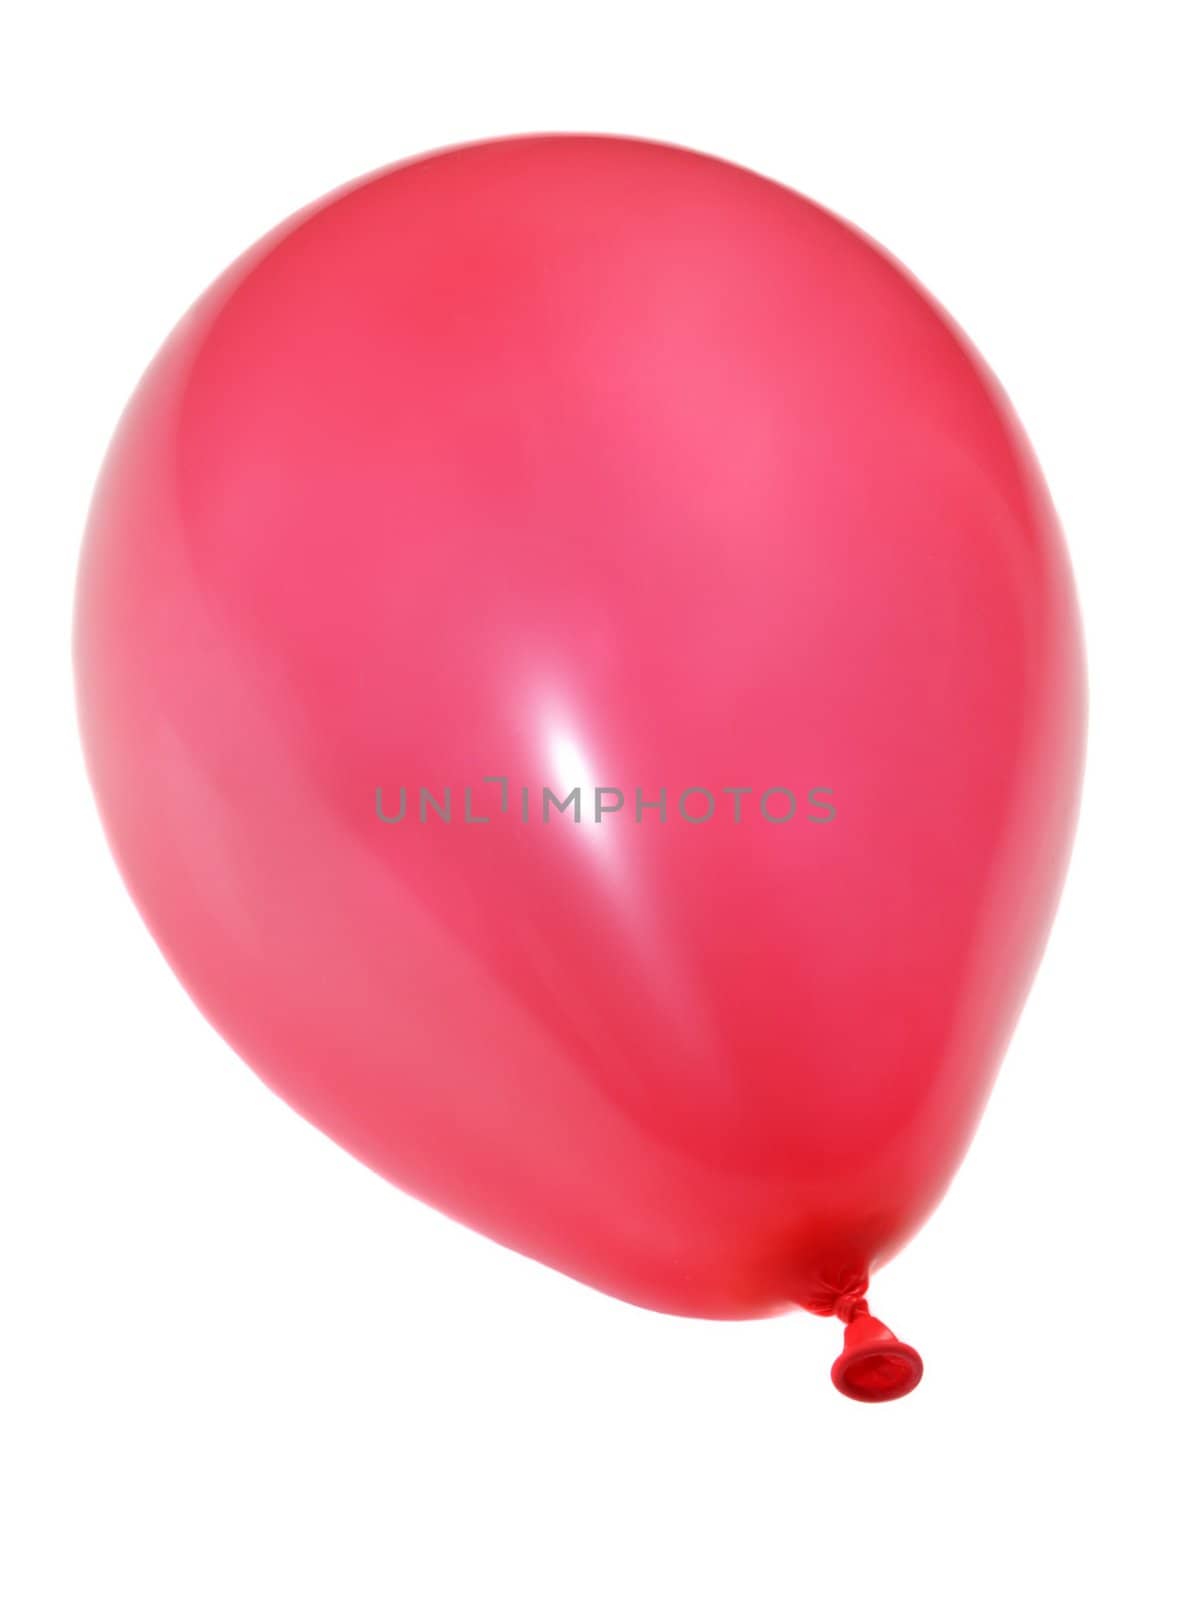 red balloon by lanalanglois